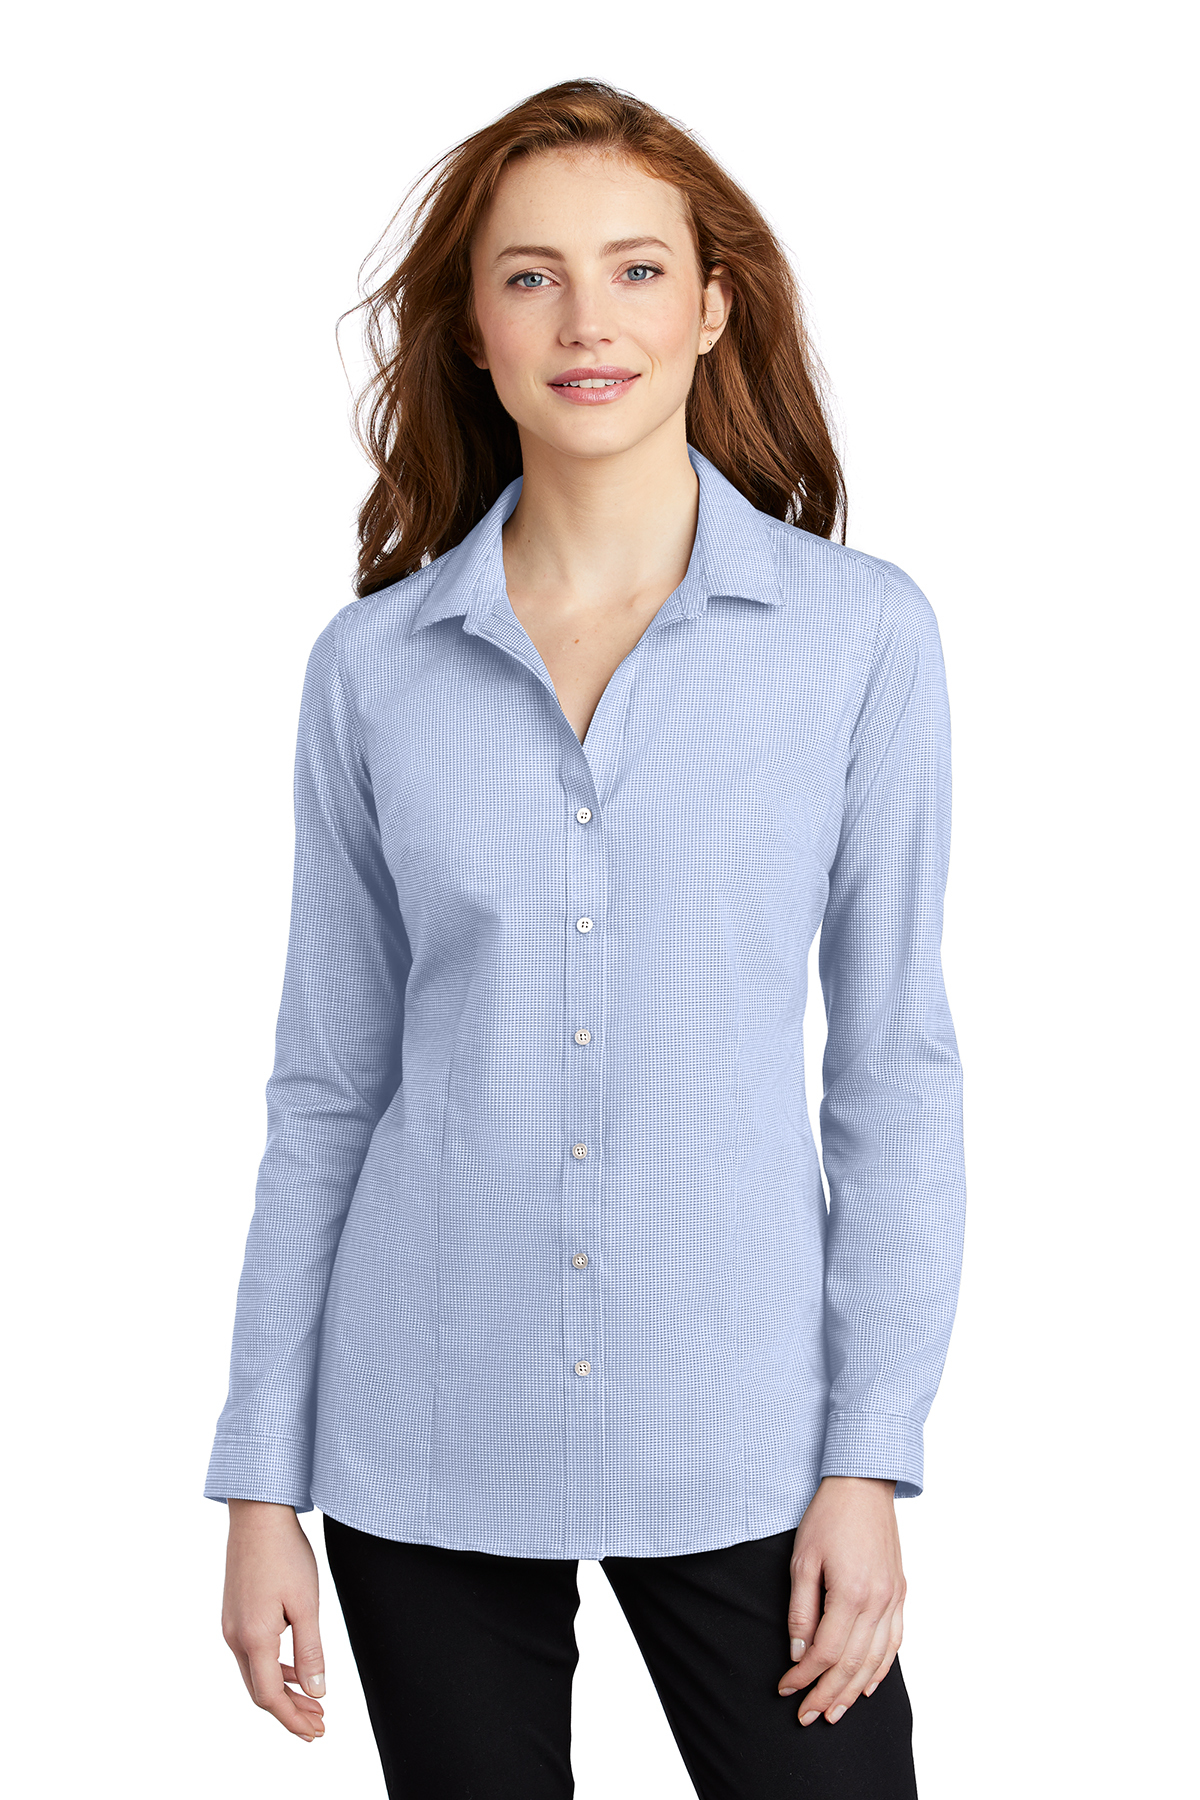 Port Authority Ladies Pincheck Easy Care Shirt | Product | SanMar